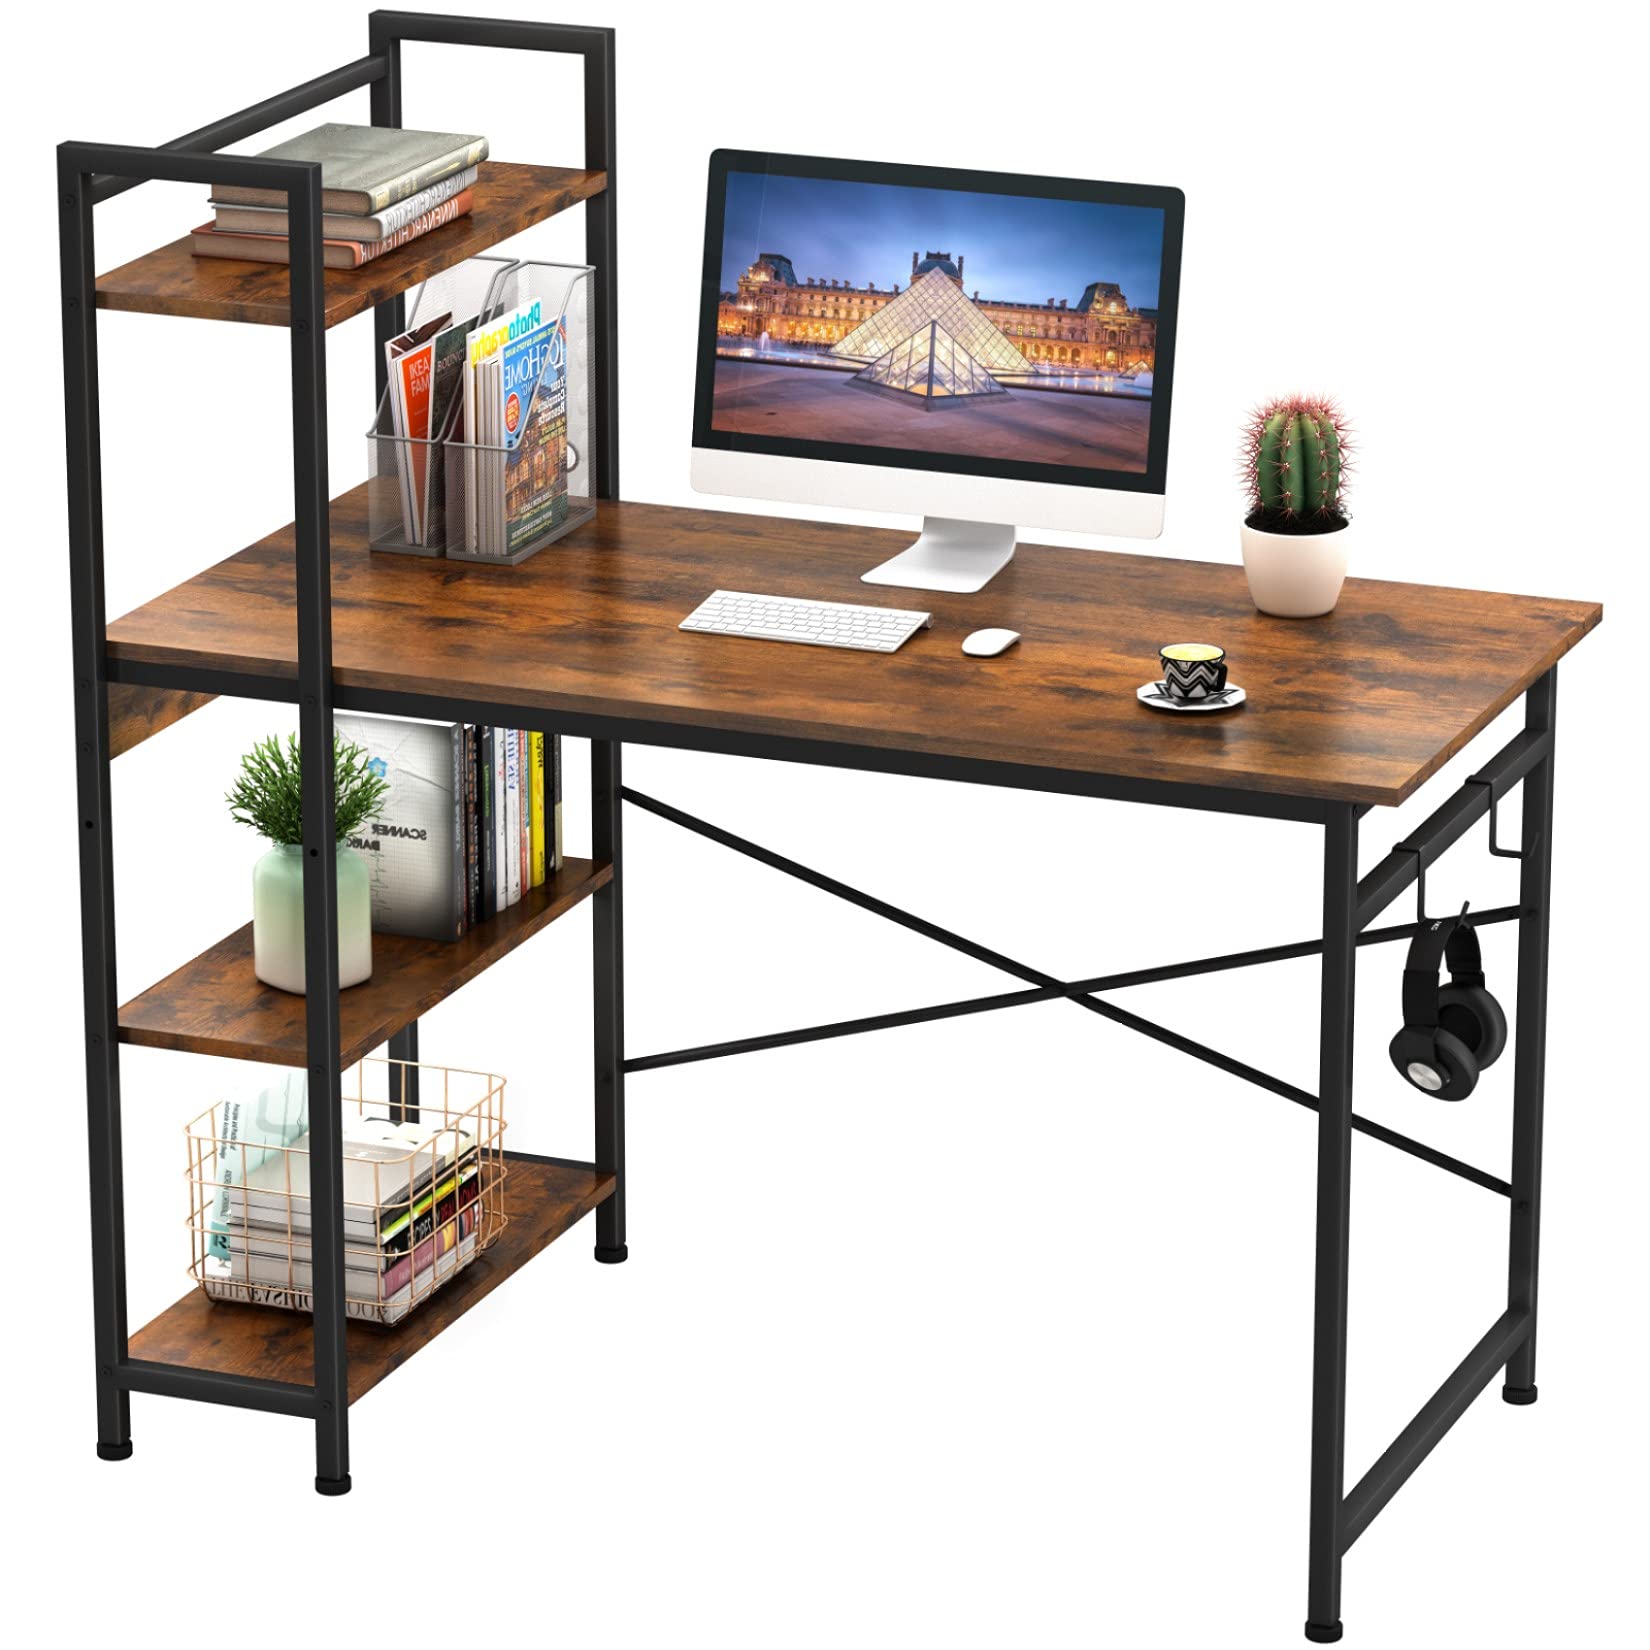 Engriy Computer Desk with 4 Tier Shelves for Home Office, 47" Writing Study Table with Bookshelf and 2 Hooks, Multipurpose Industrial Wood Desk...